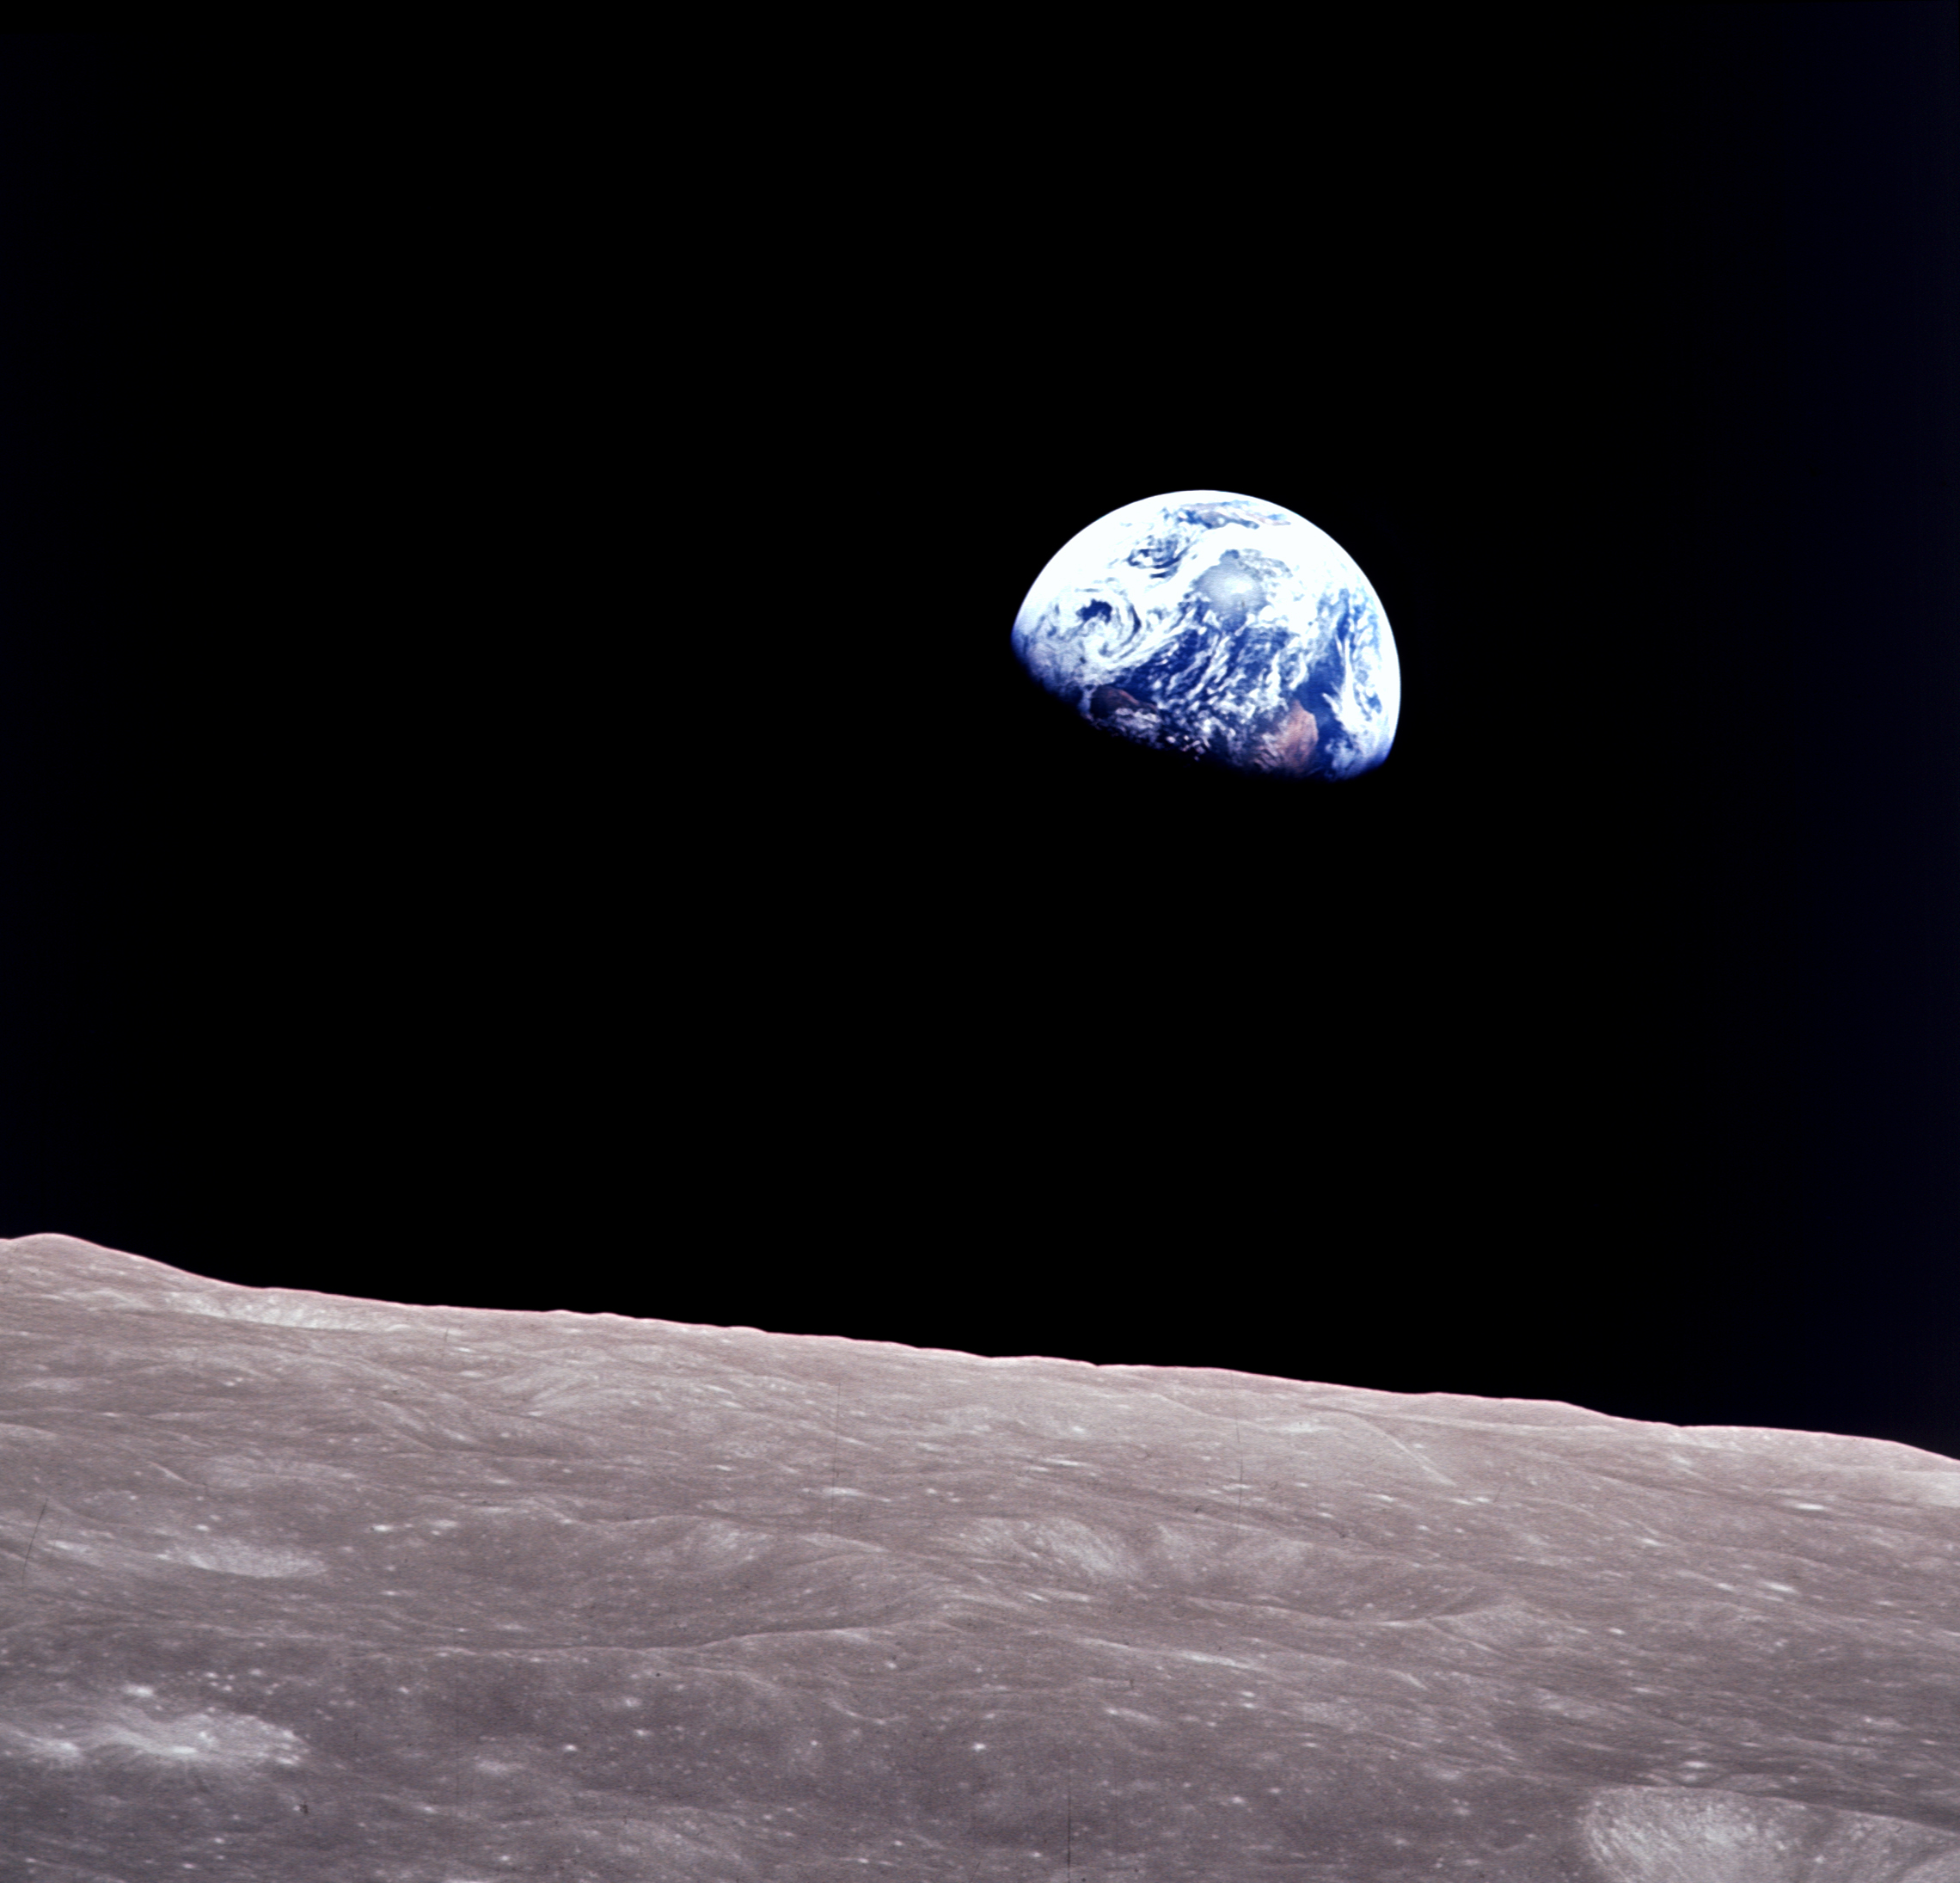 Earthrise from Apollo 8 on Christmas Eve